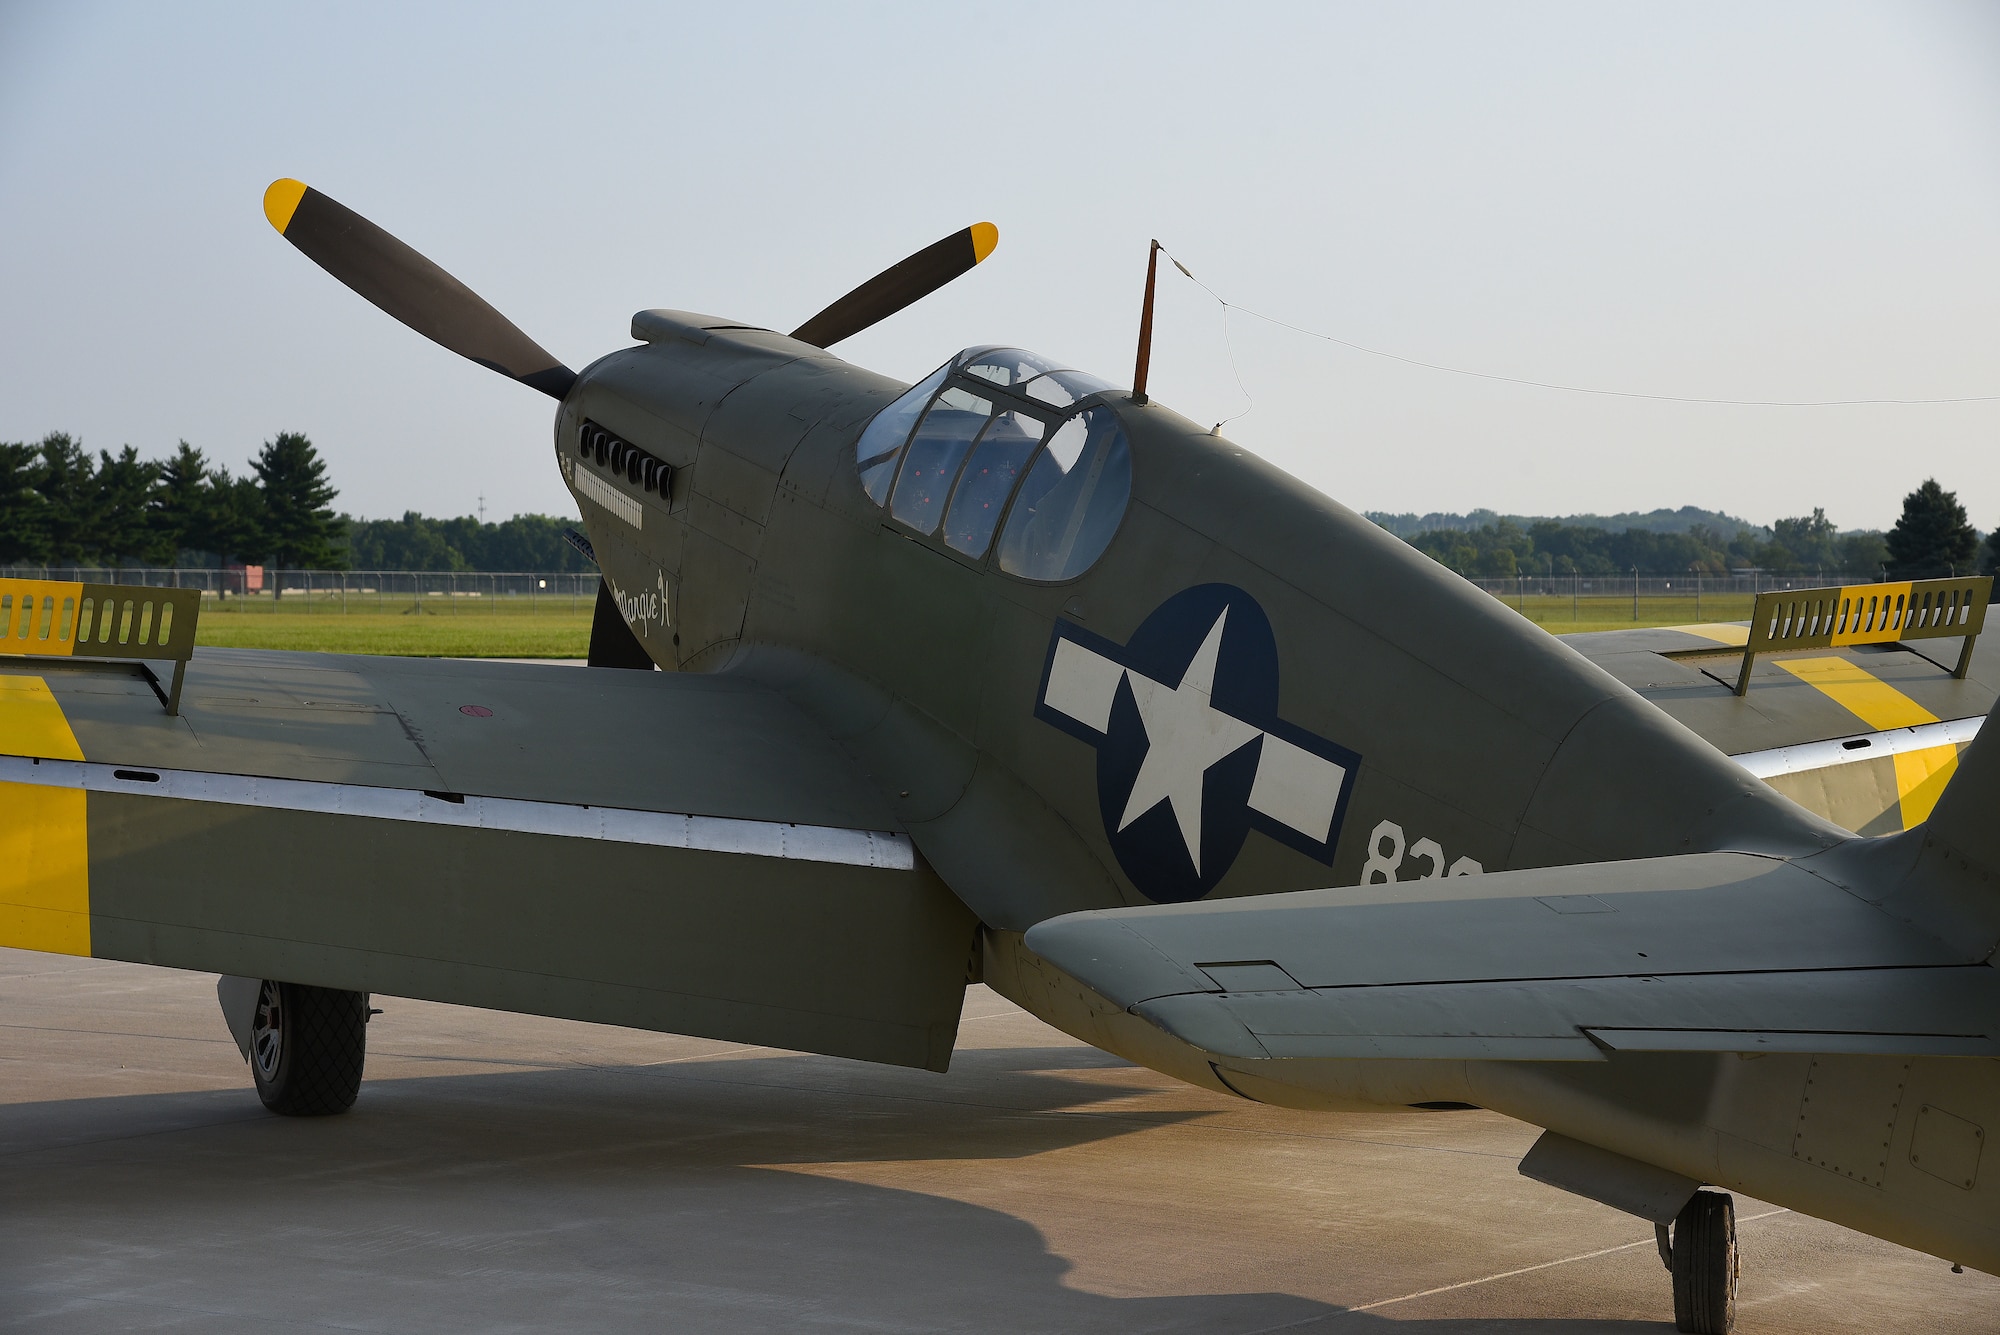 North American A-36A Mustang > National Museum of the United